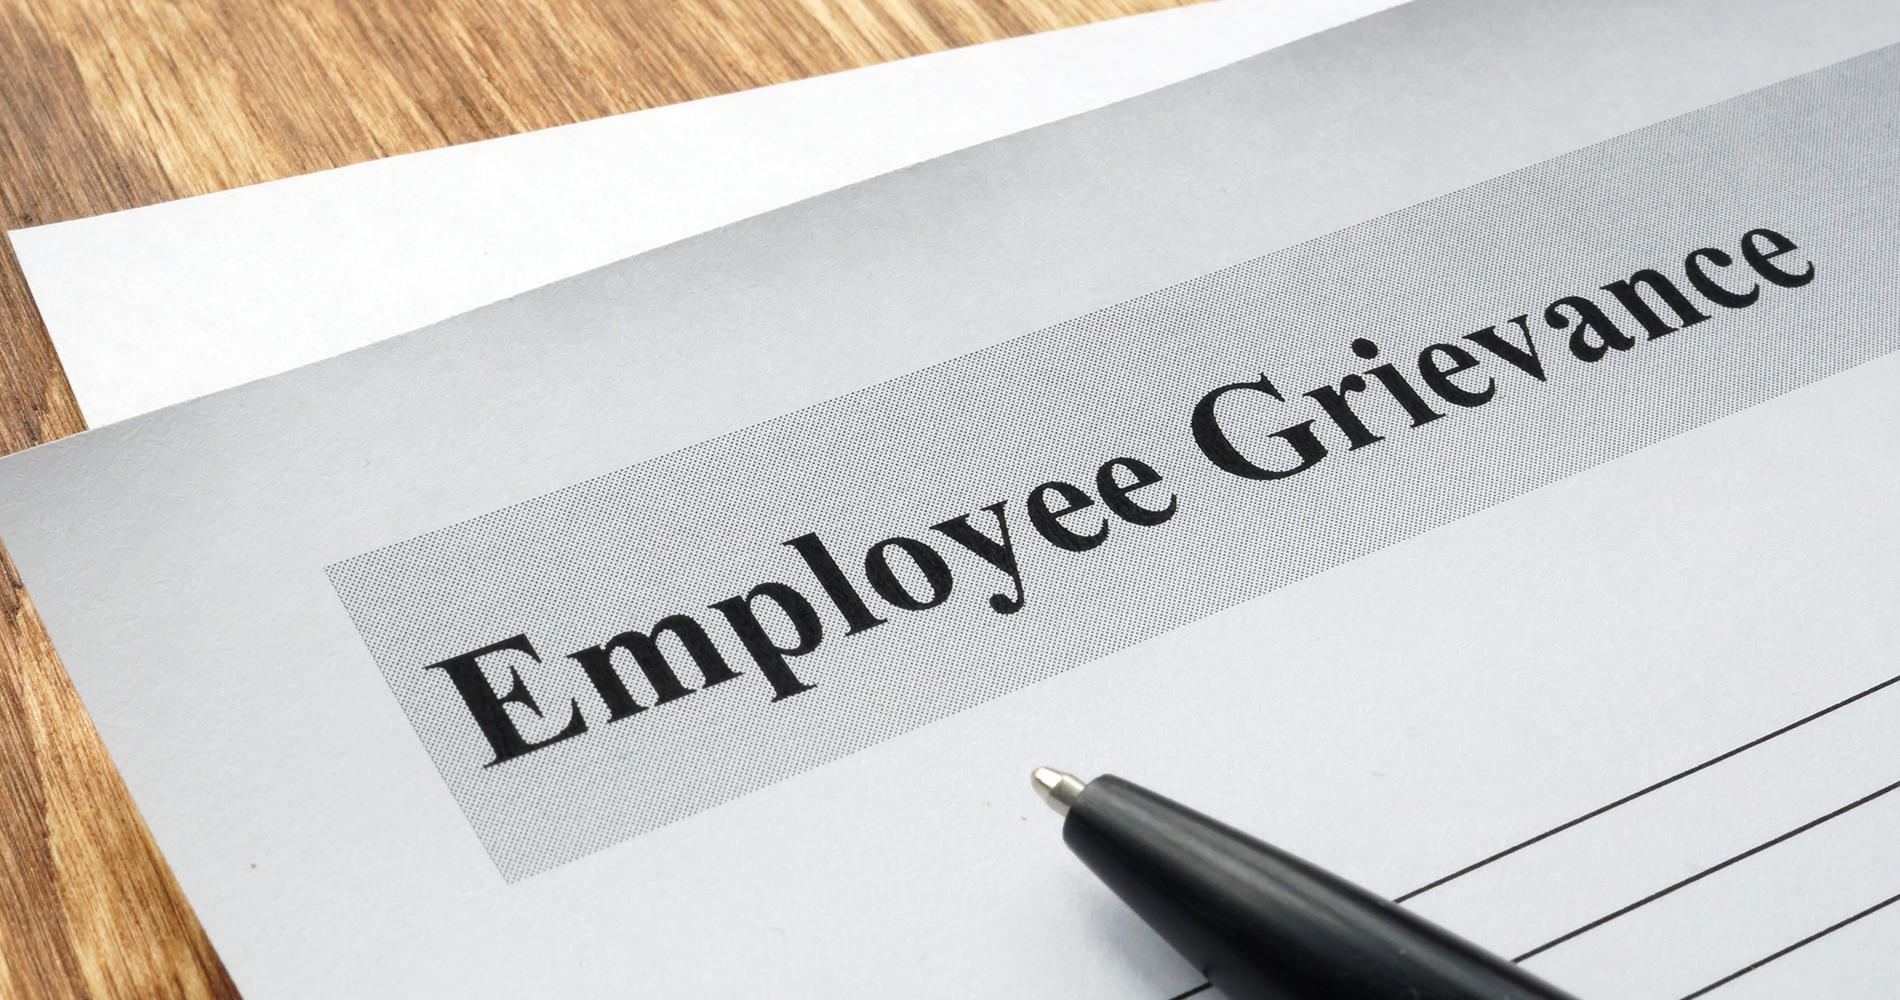 Papers titled Employee Grievance and pen